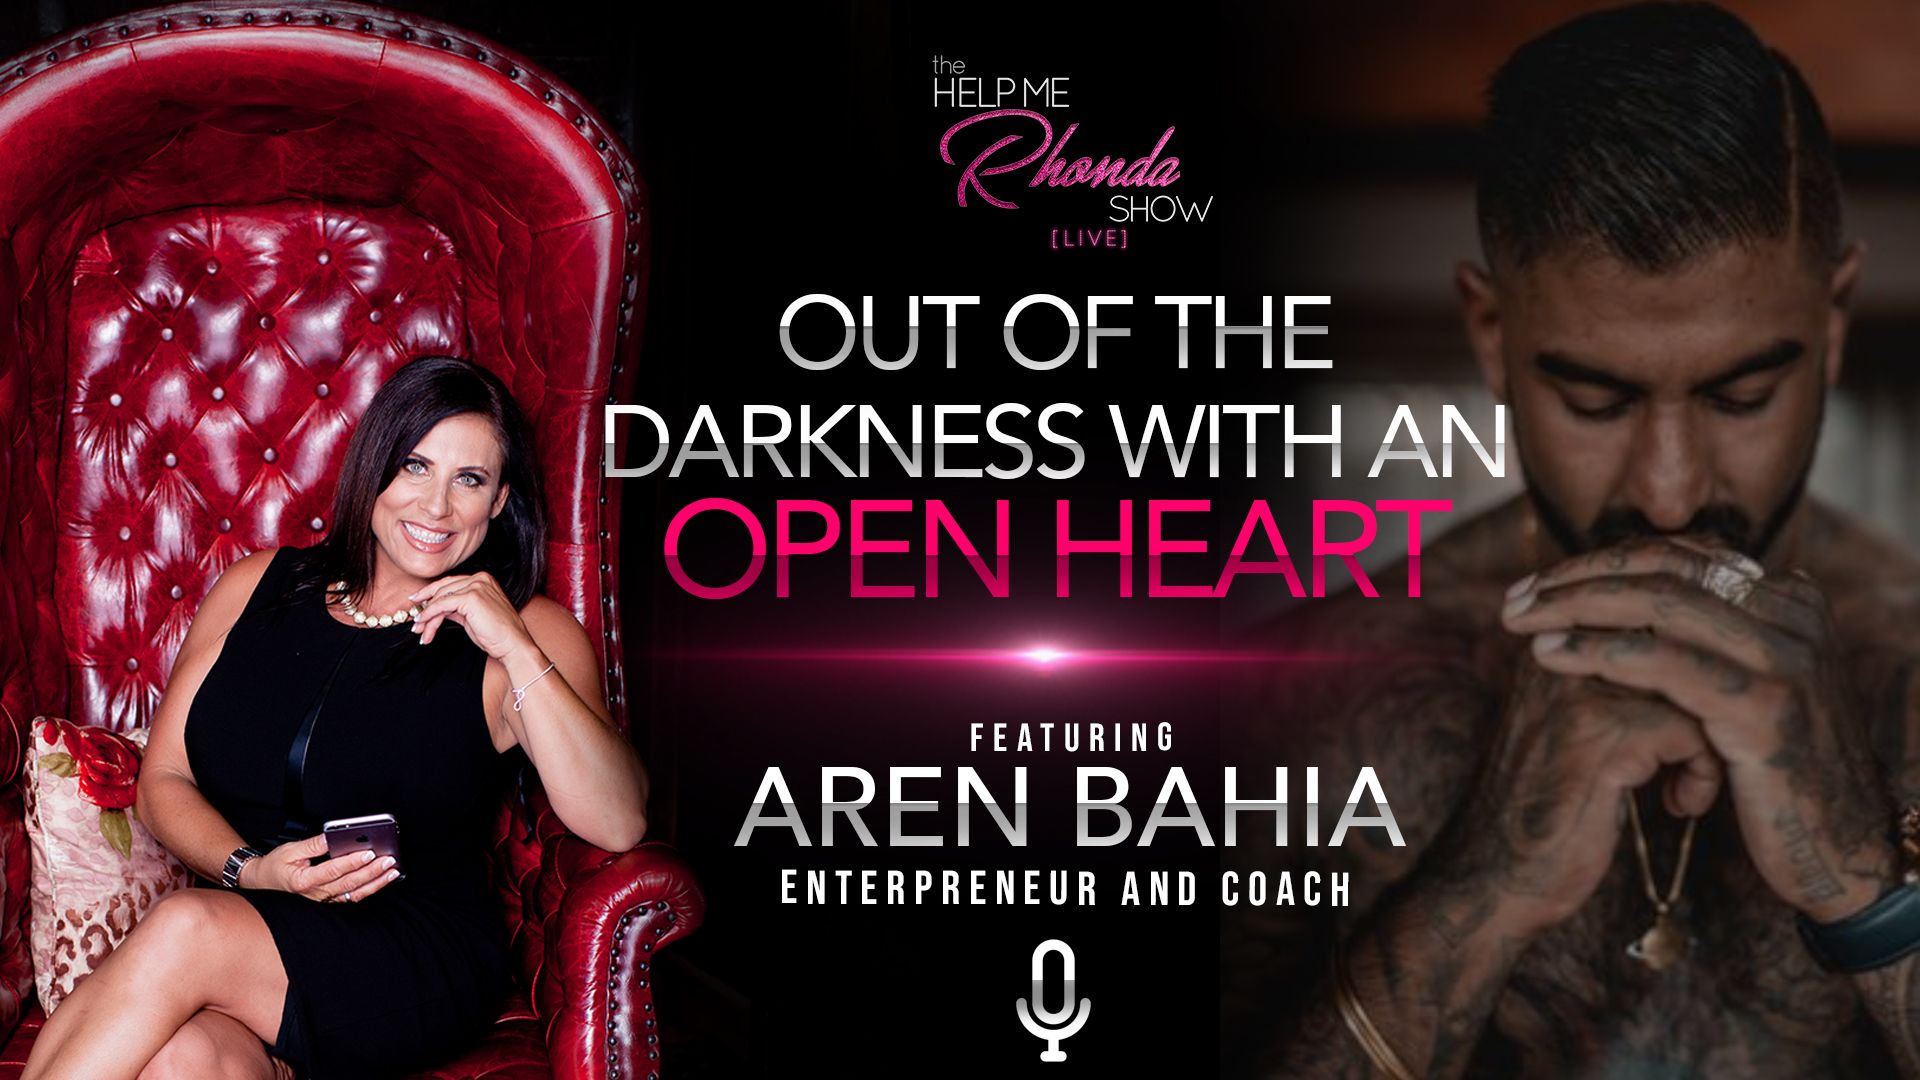 Aren Bahia - Out Of The Darkness With An Open Heart!